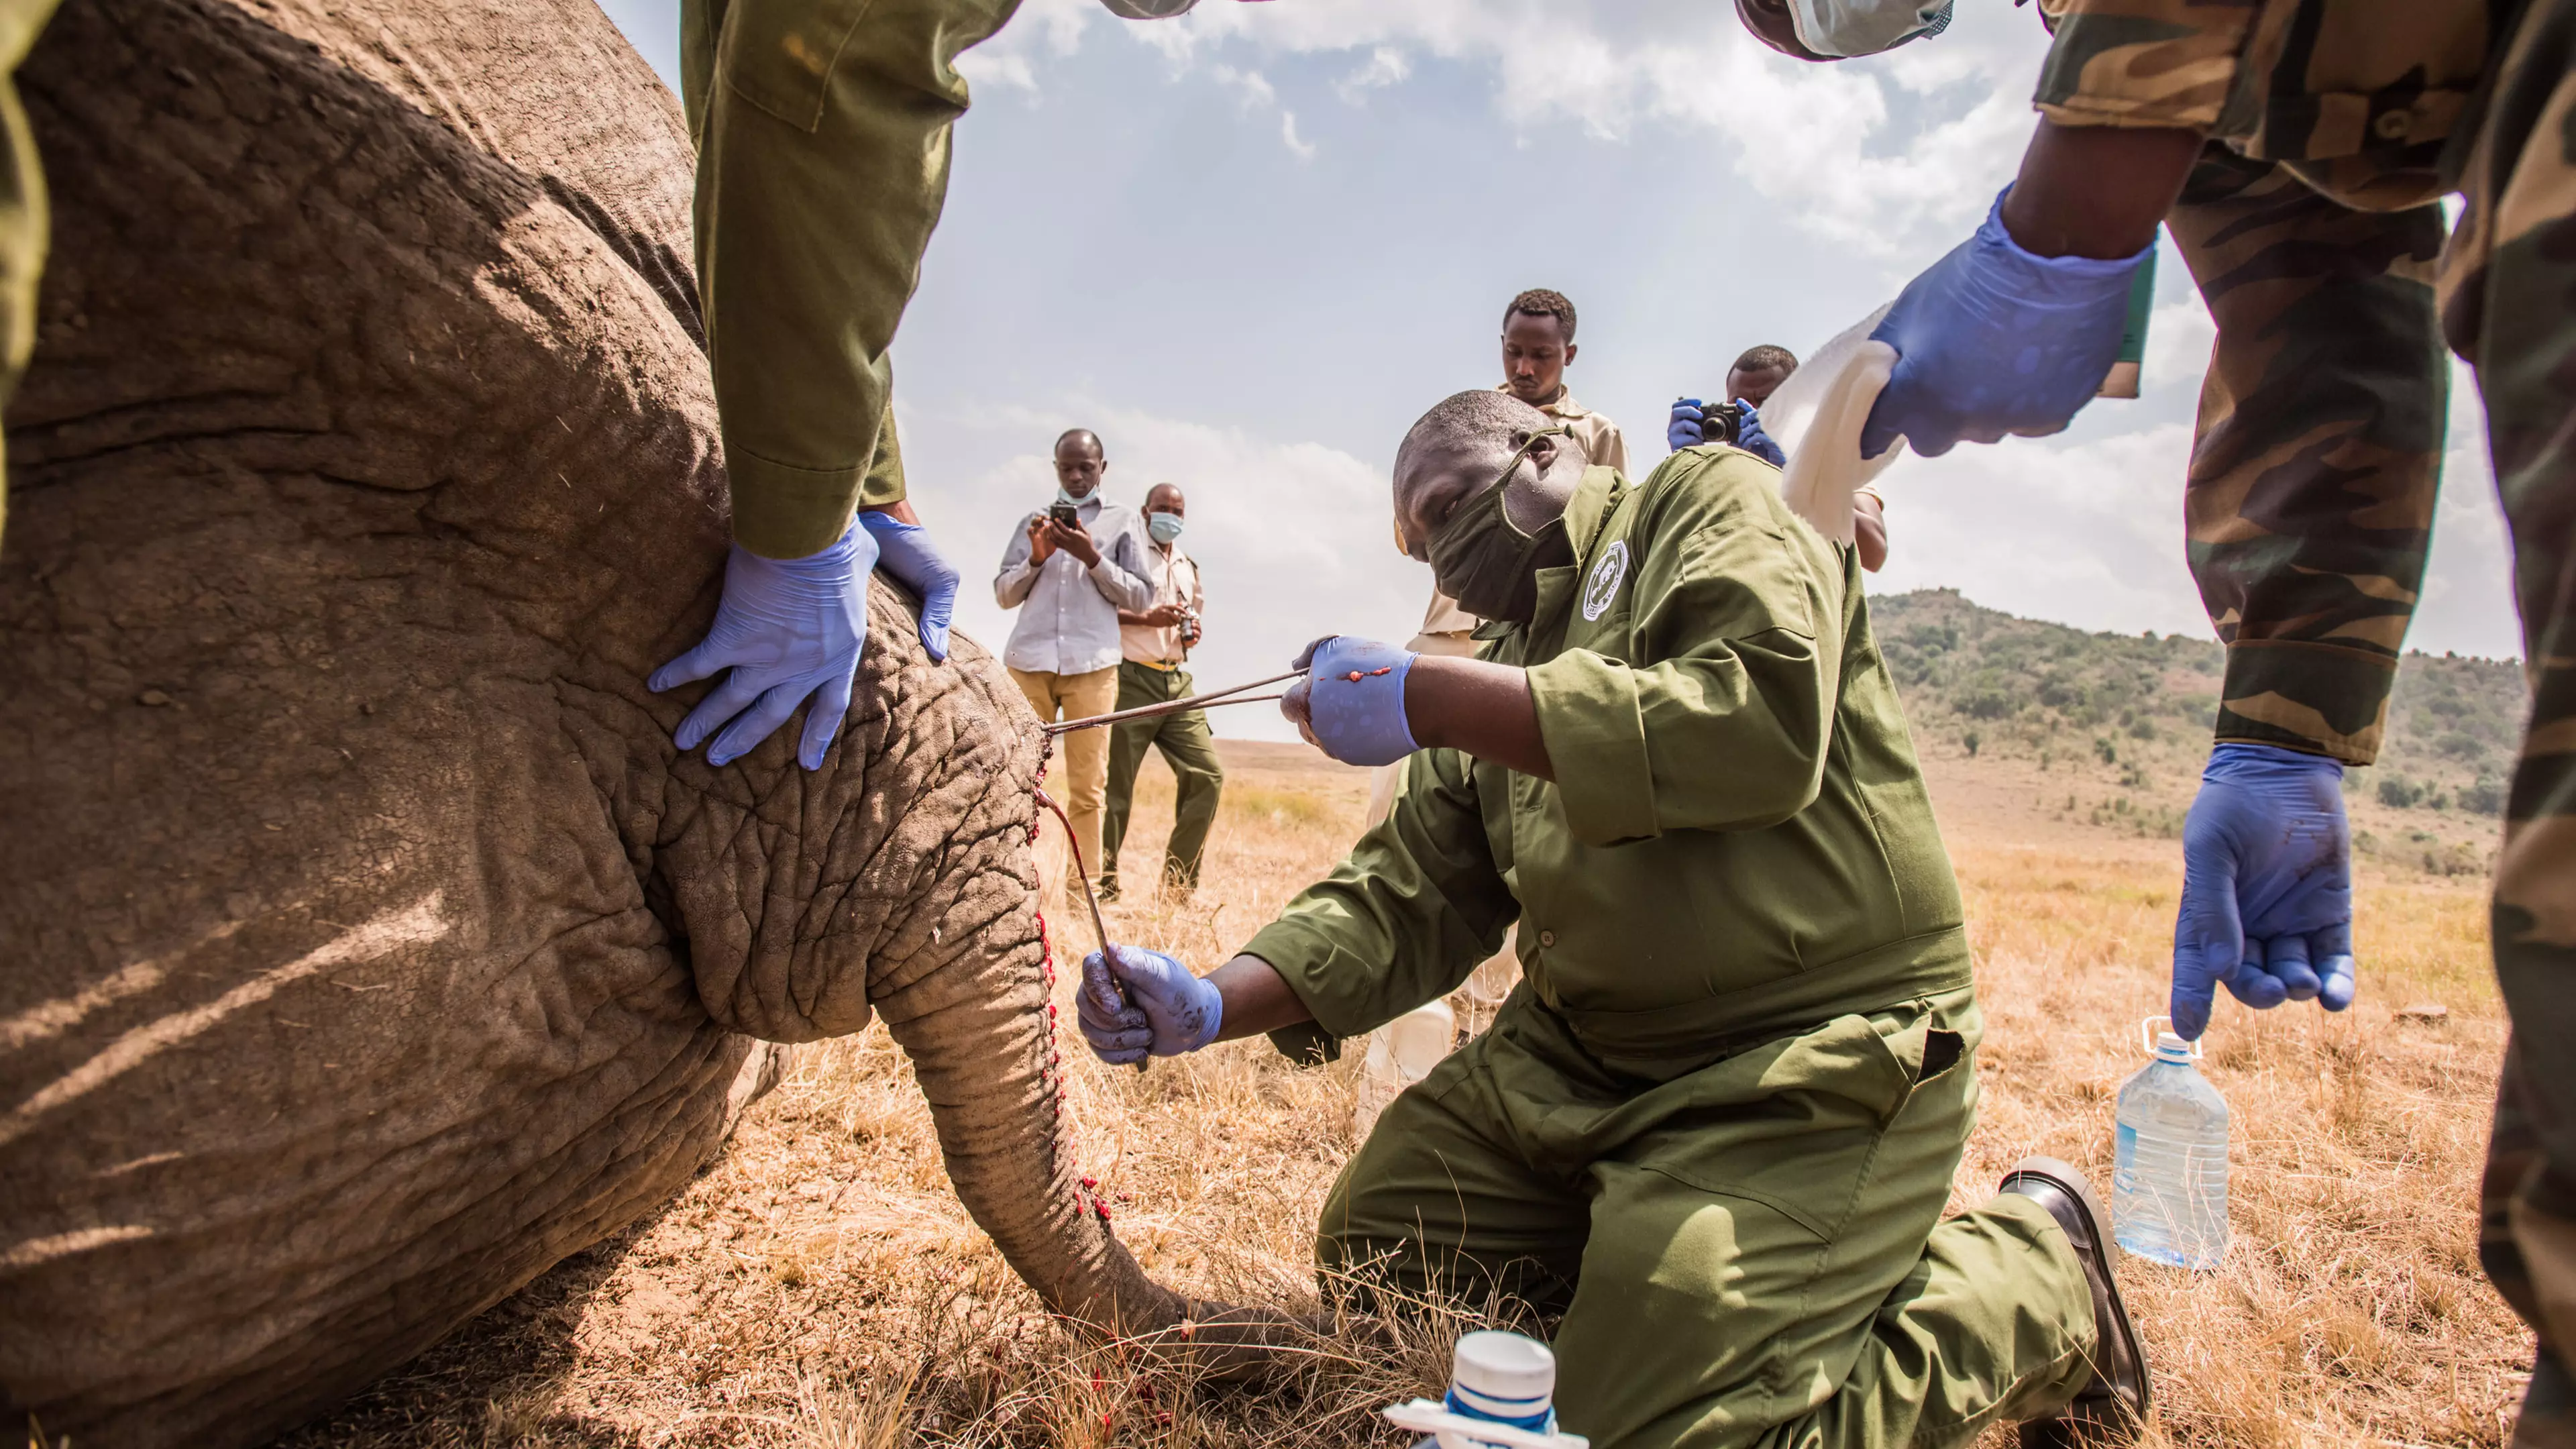 Dramatic Moment Vets Save Elephant's Life In Kenya After It Was Speared